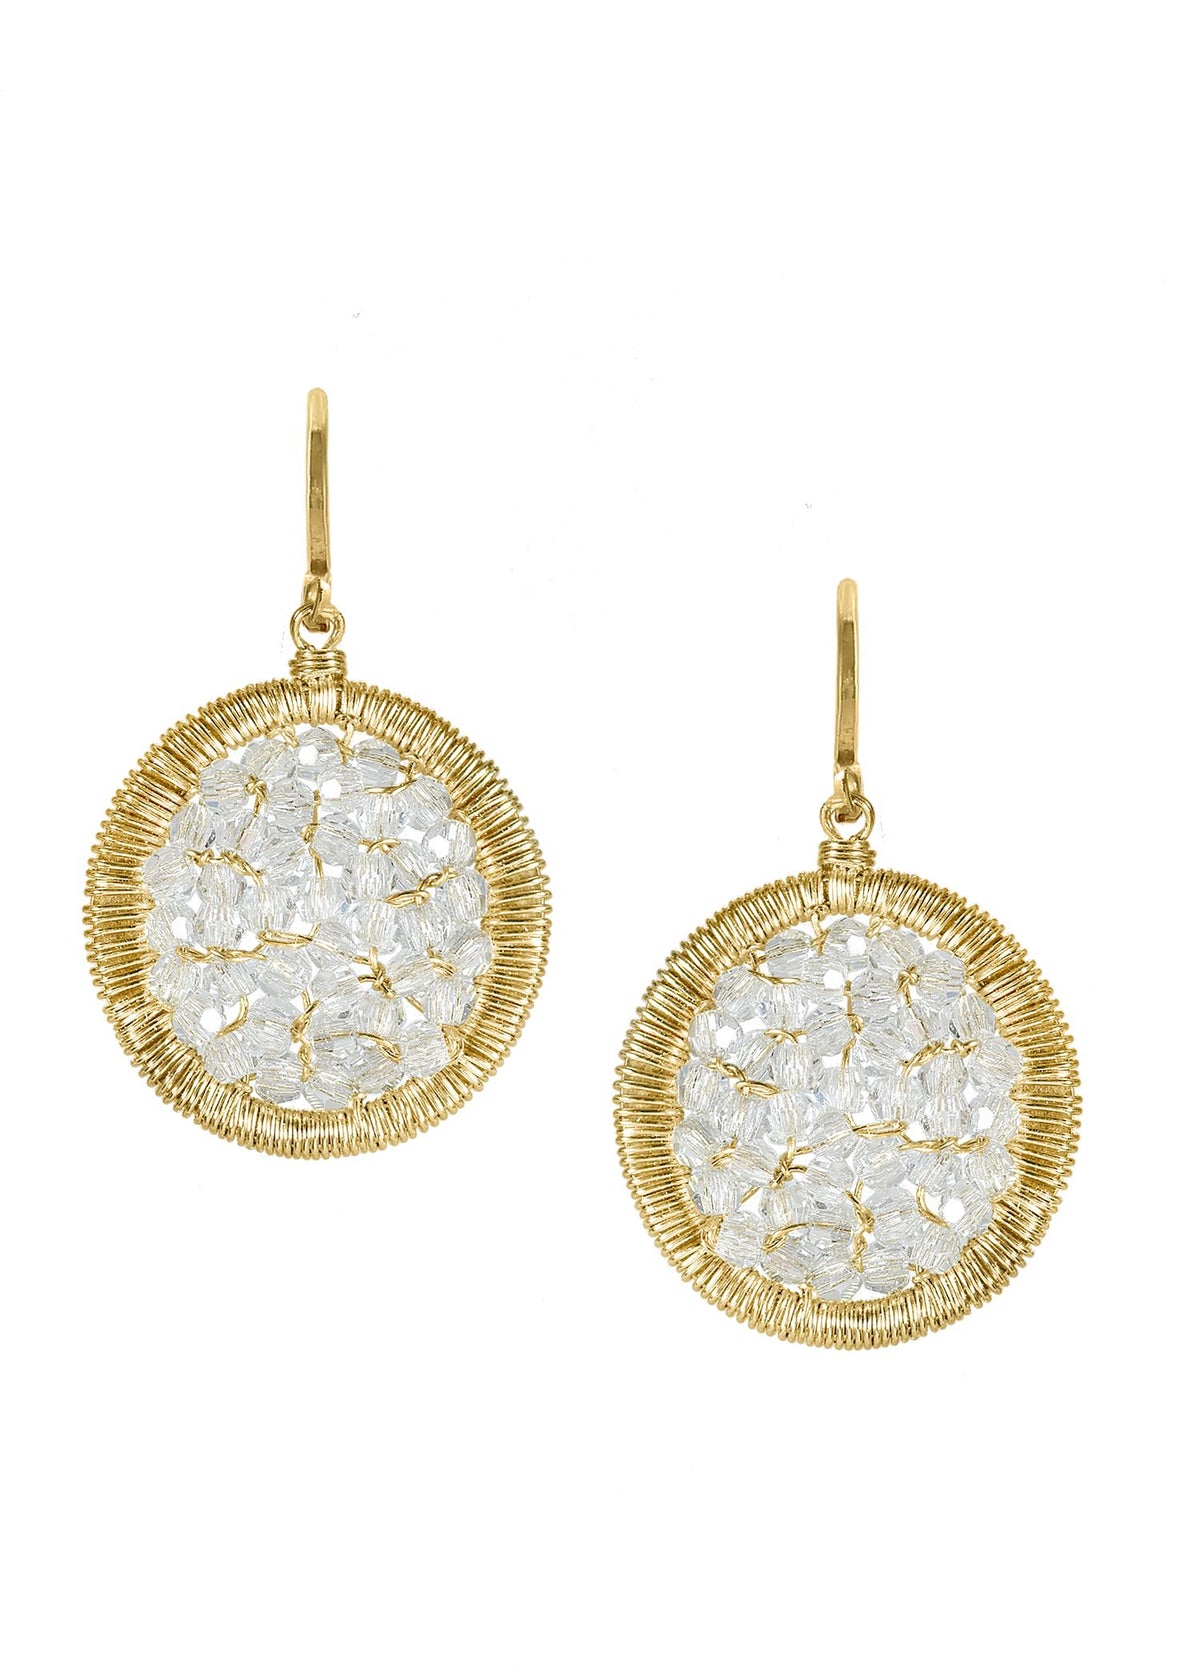 Crystal 14k gold fill Earrings measure 1-3/16&quot; in length (including the ear wires) and 5/8&quot; in width Handmade in our Los Angeles studio